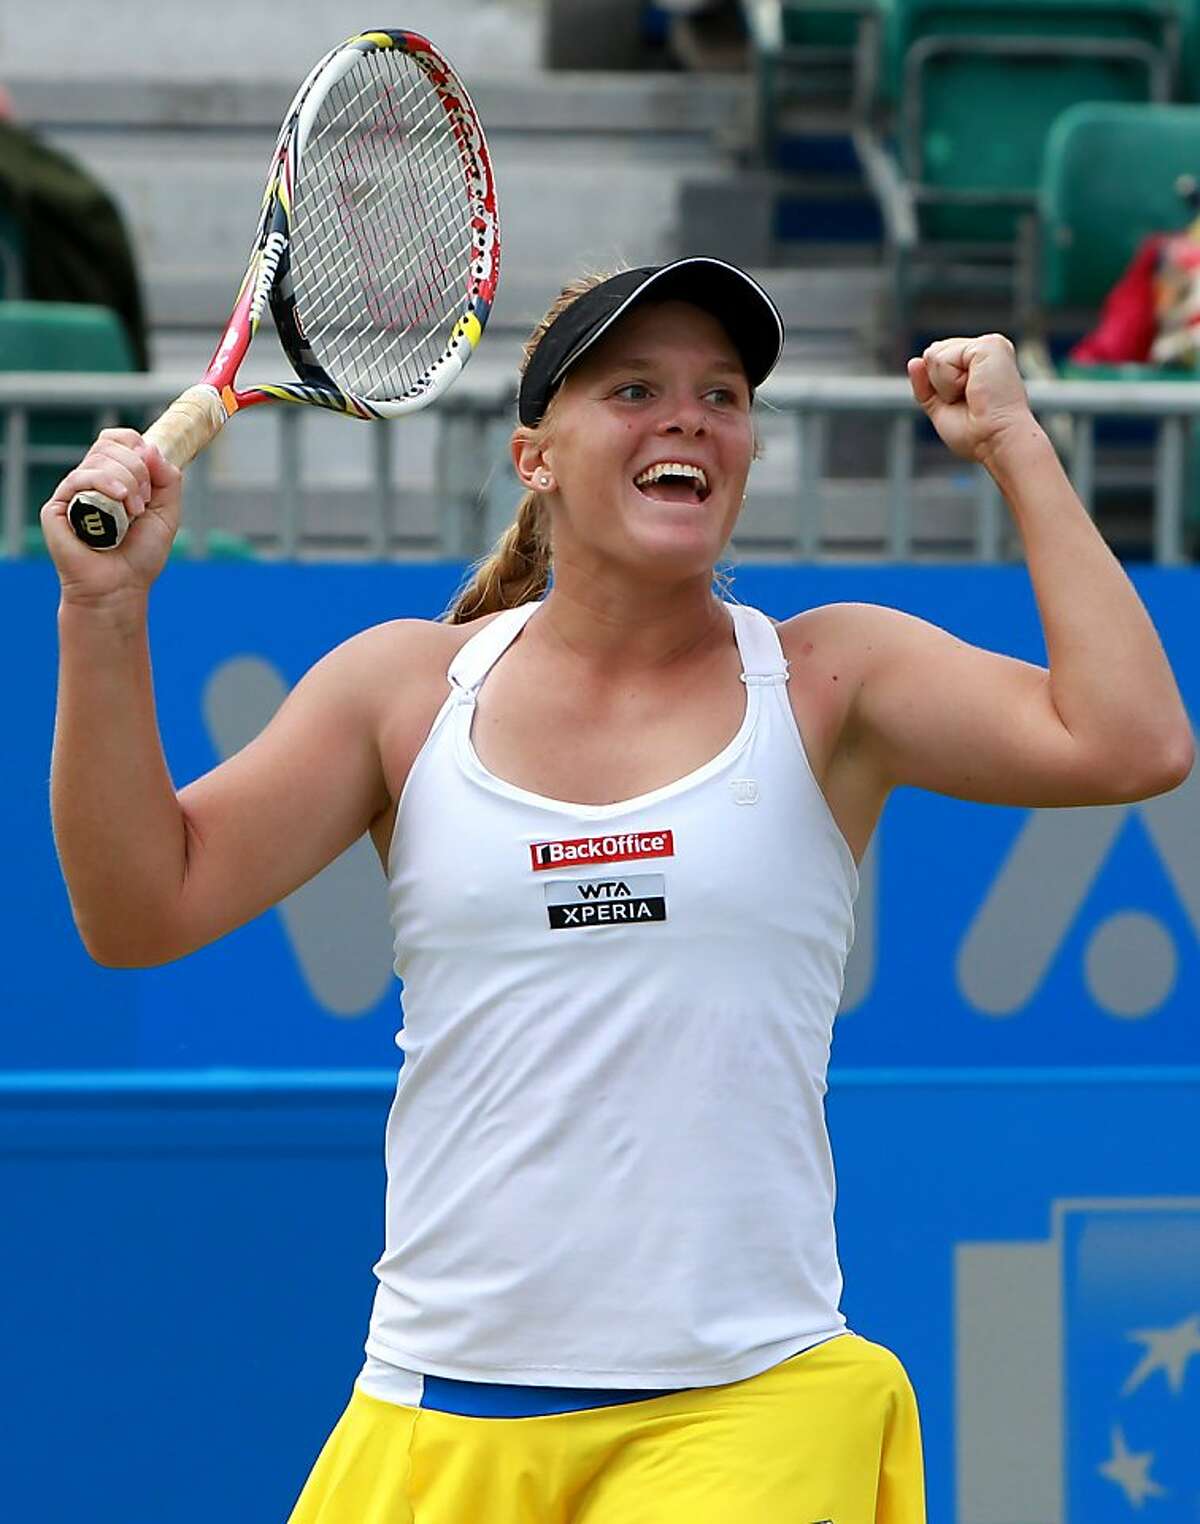 BIRMINGHAM, ENGLAND - JUNE 18: Melanie Oudin of USA celebrates victory over Jelena Jancovic of Serbia during the singles final match on day eight of the AEGON Classic at Edgbaston Priory Club on June 18, 2012 in Birmingham, England. (Photo by Jan Kruger/Getty Images)